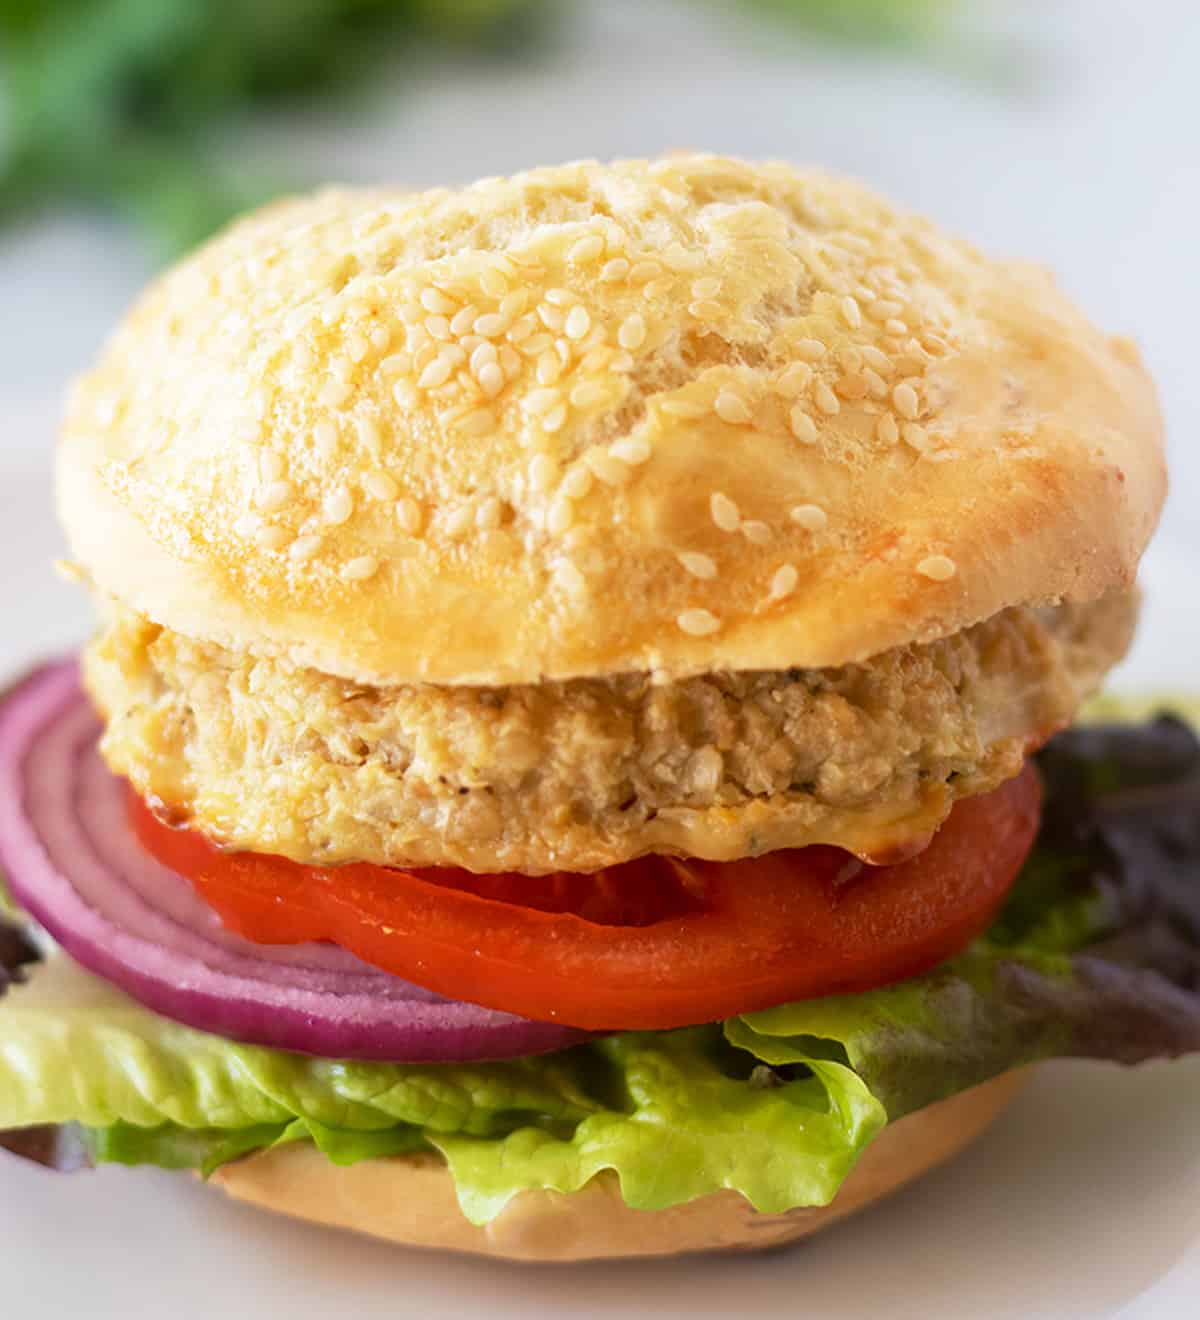 chickpea burger on a bun with lettuce, tomato and red onion